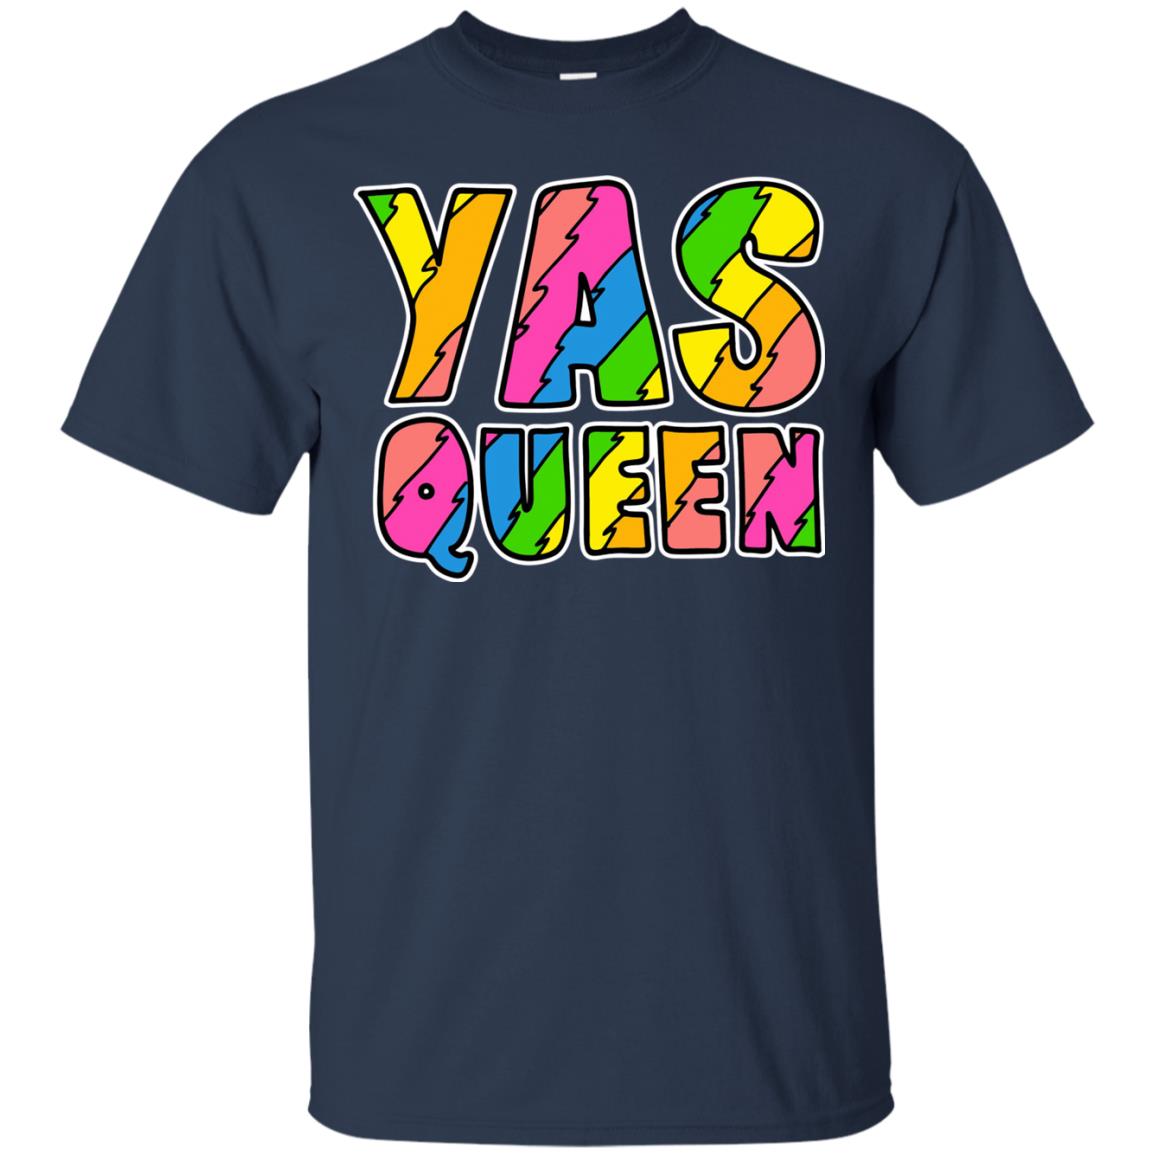 broad city yas queen t shirt - navy blue